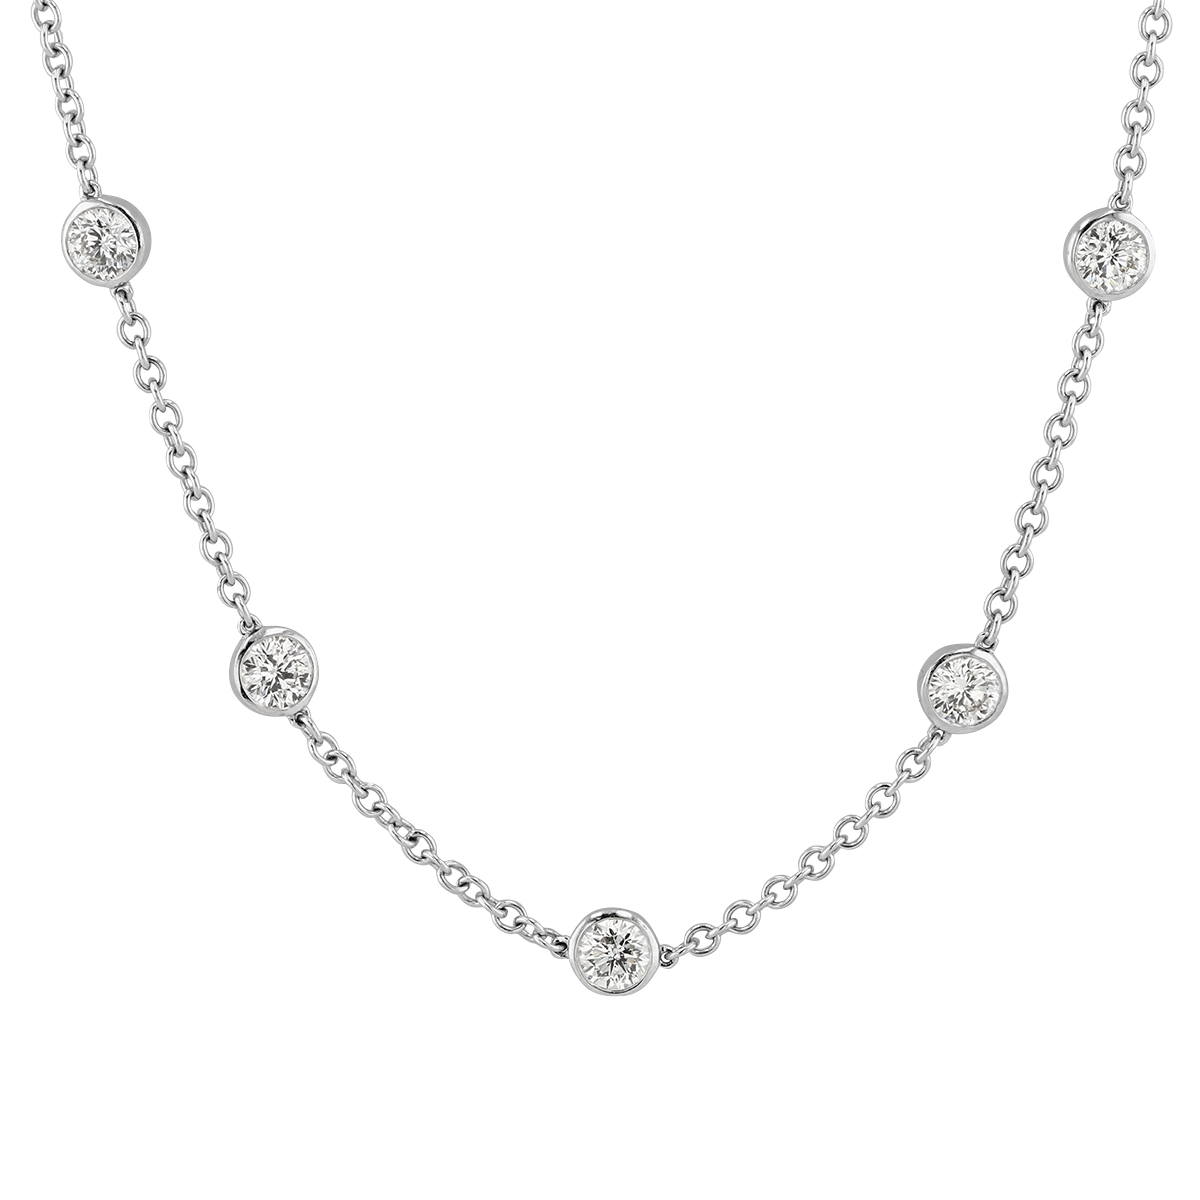 Borsheims Signature Oval Diamond 18 Station Necklace in White Gold, 24 ...